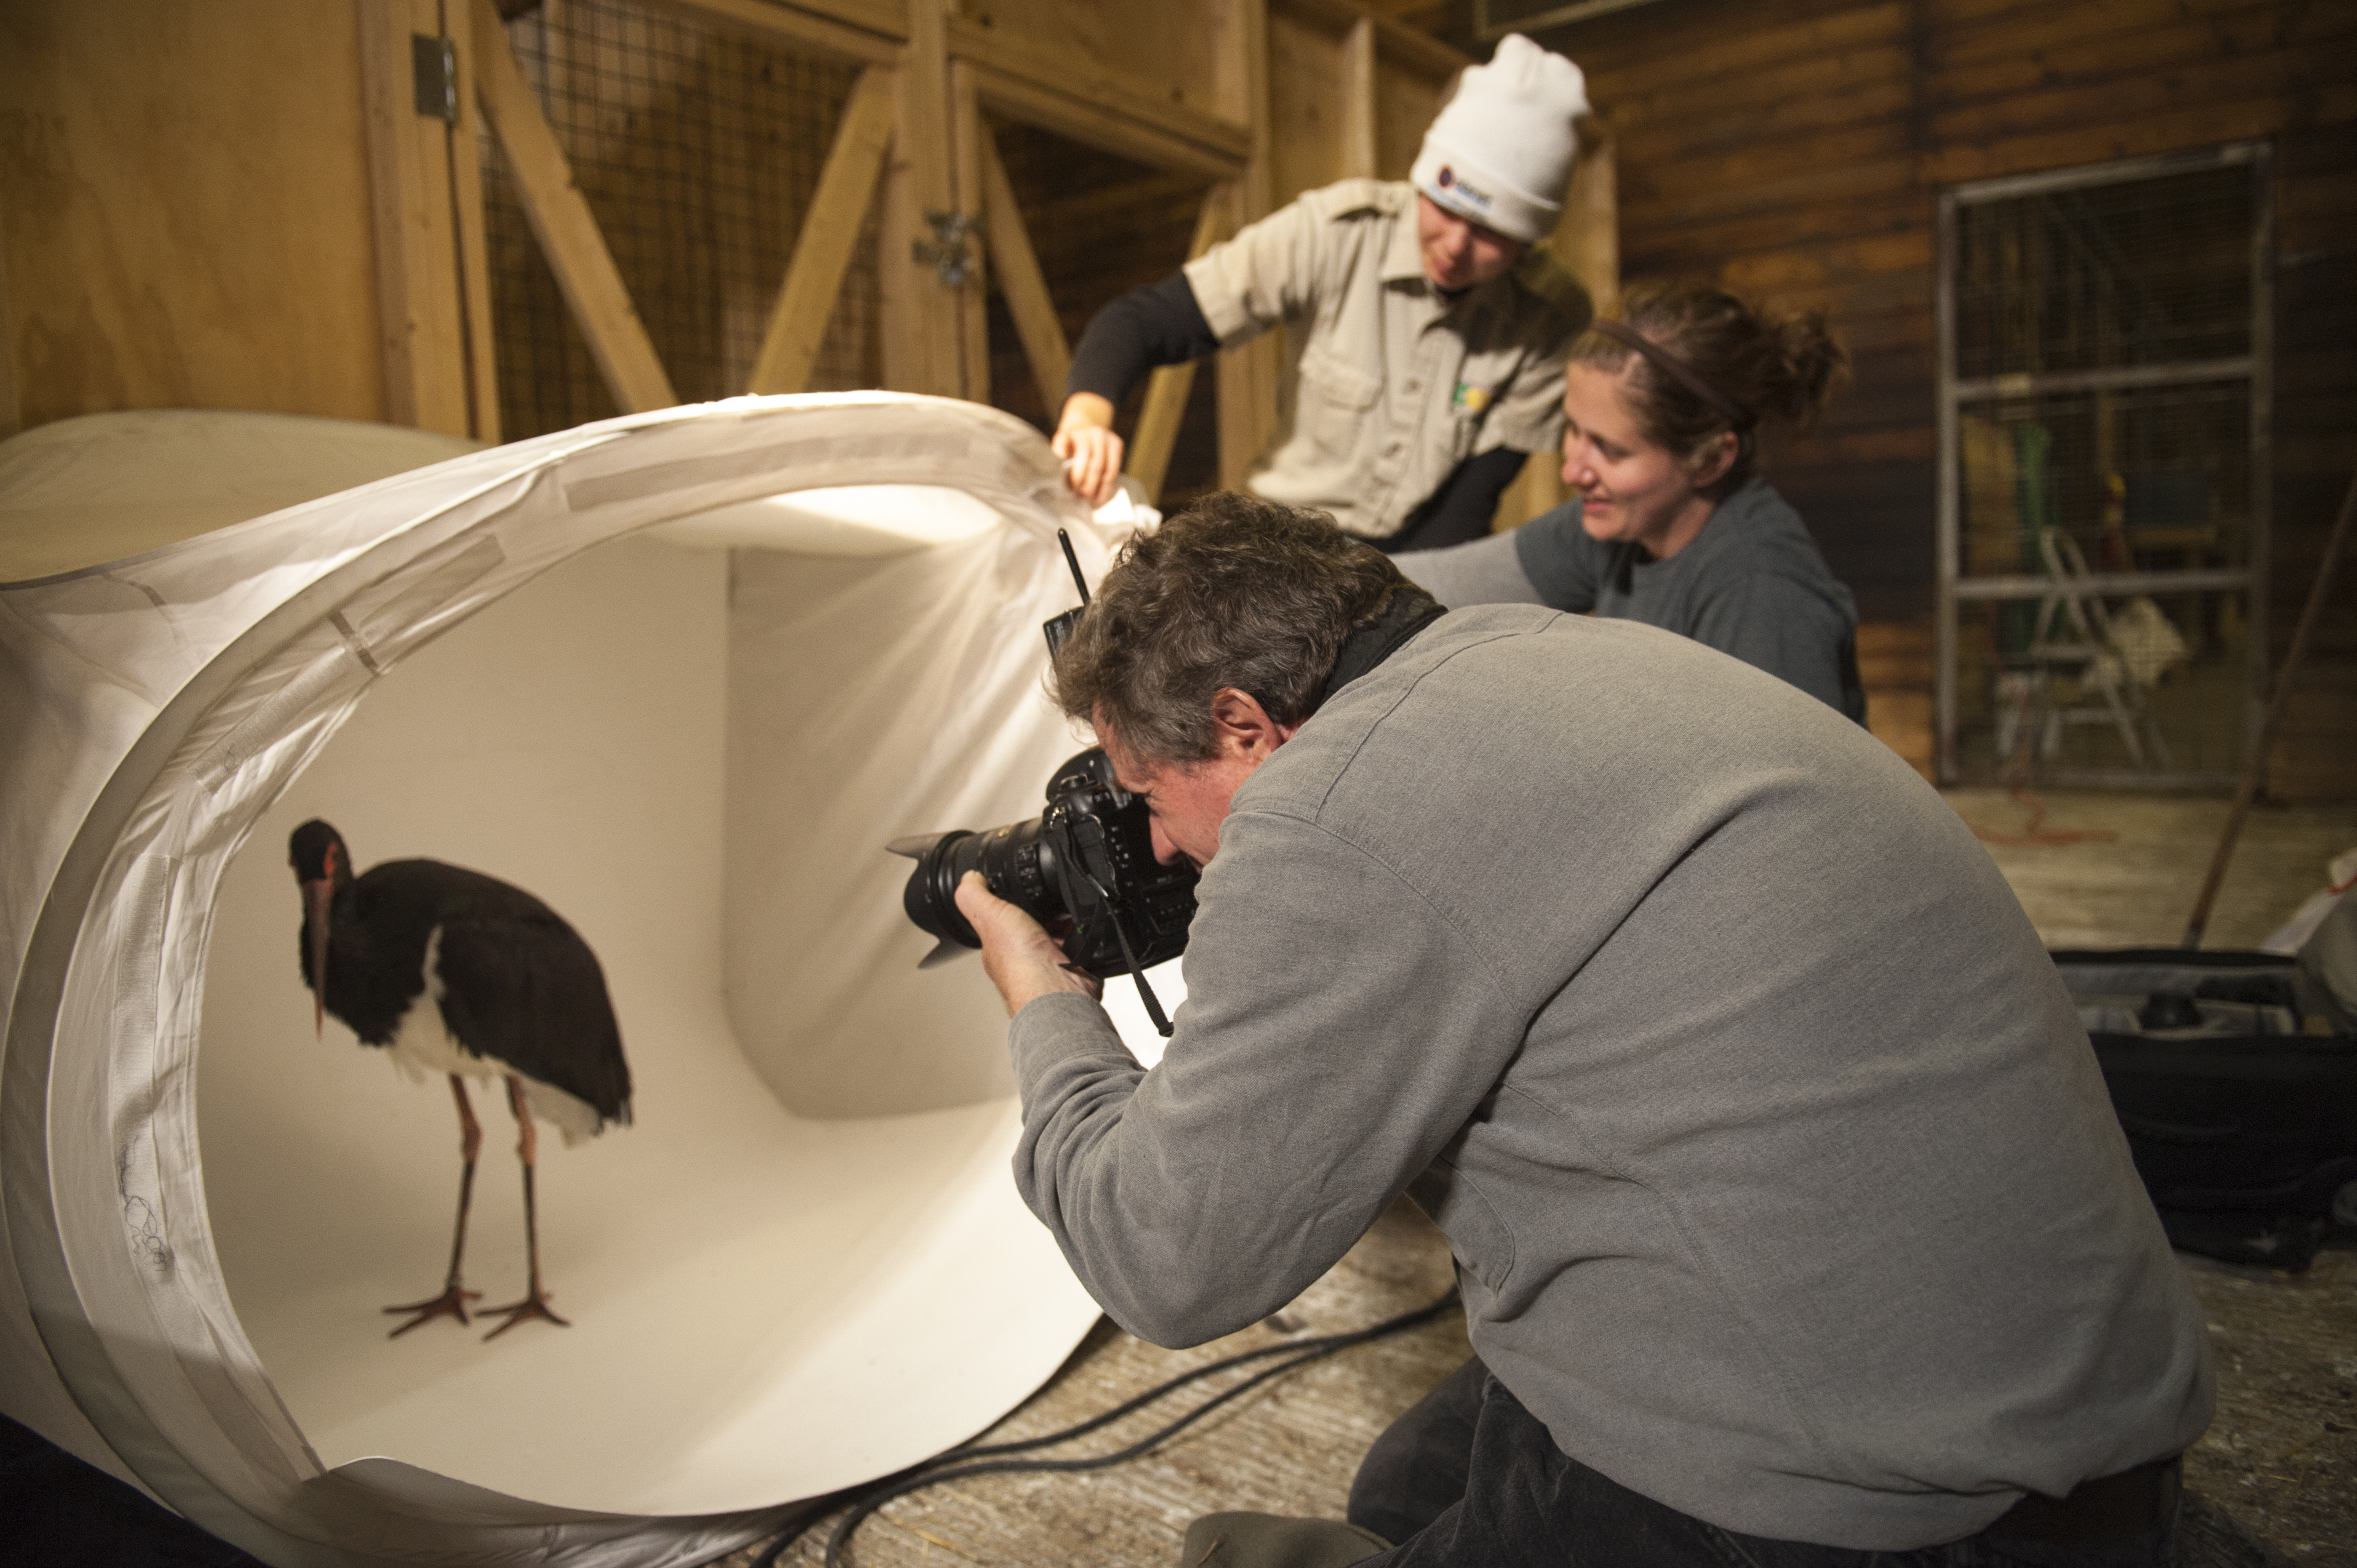 national-geographic-photographer-joel-sartore-photographs-a-black-stork-for-his-photo-ark-project-during-a-visit-to-fort-wayne